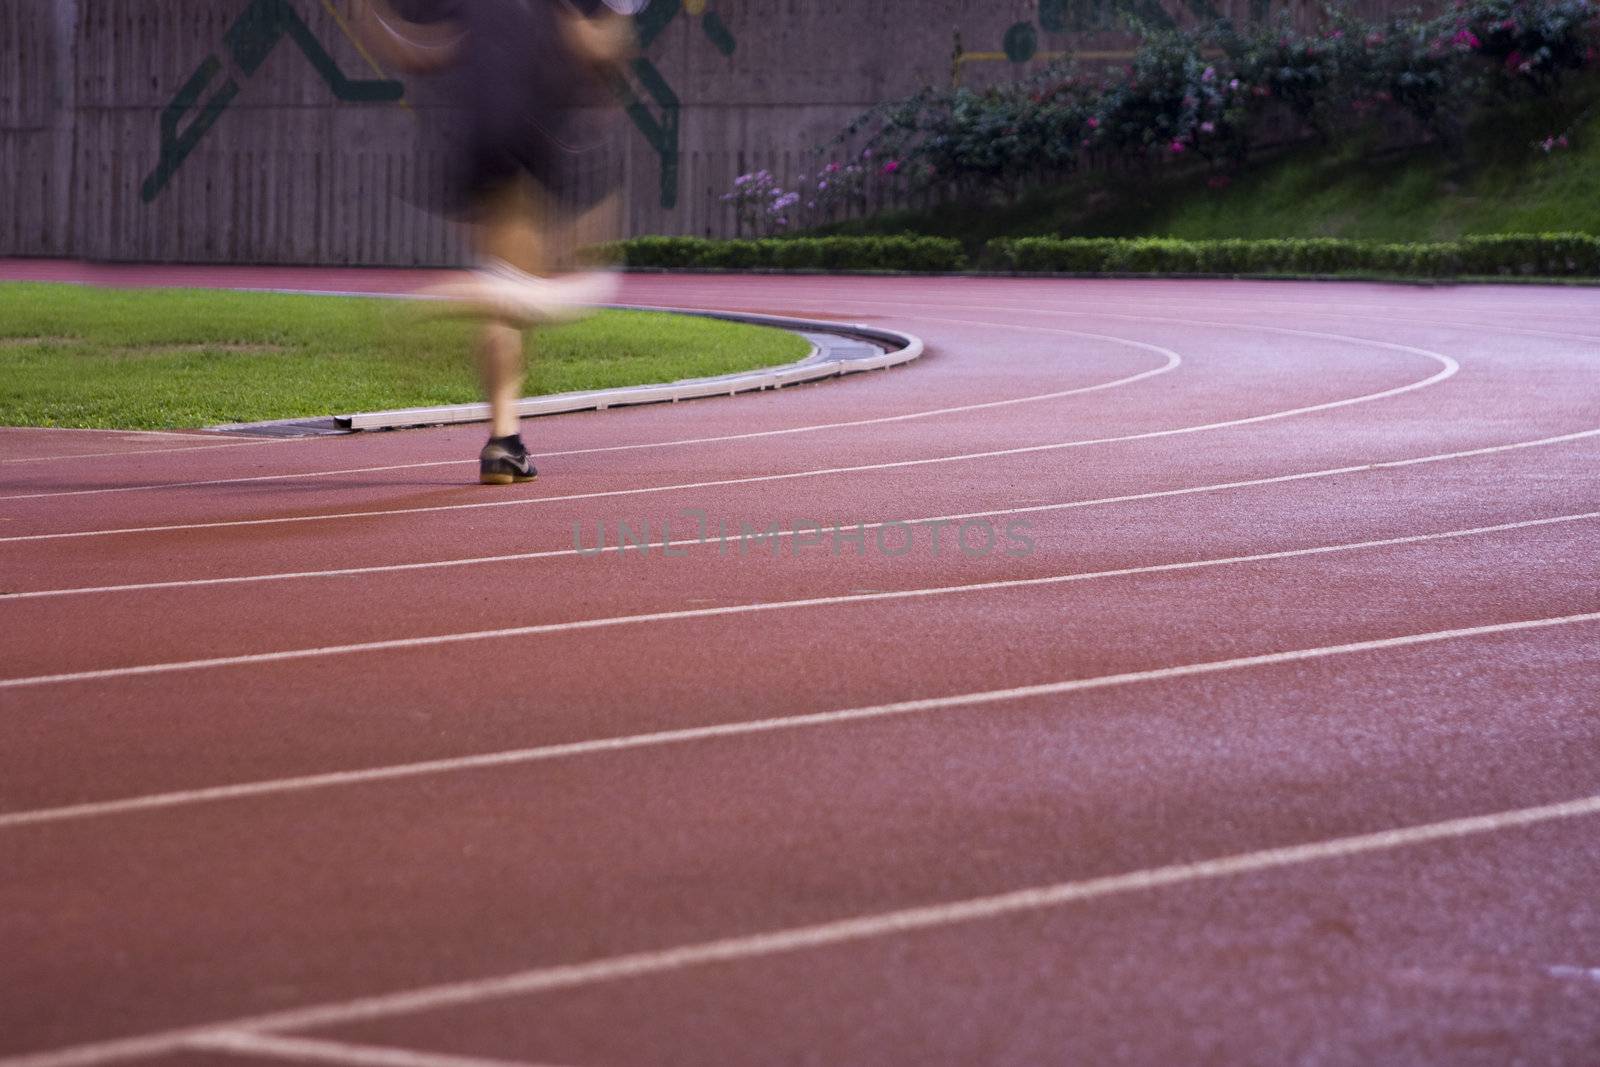 It is a man running in play gorund lanes on a track